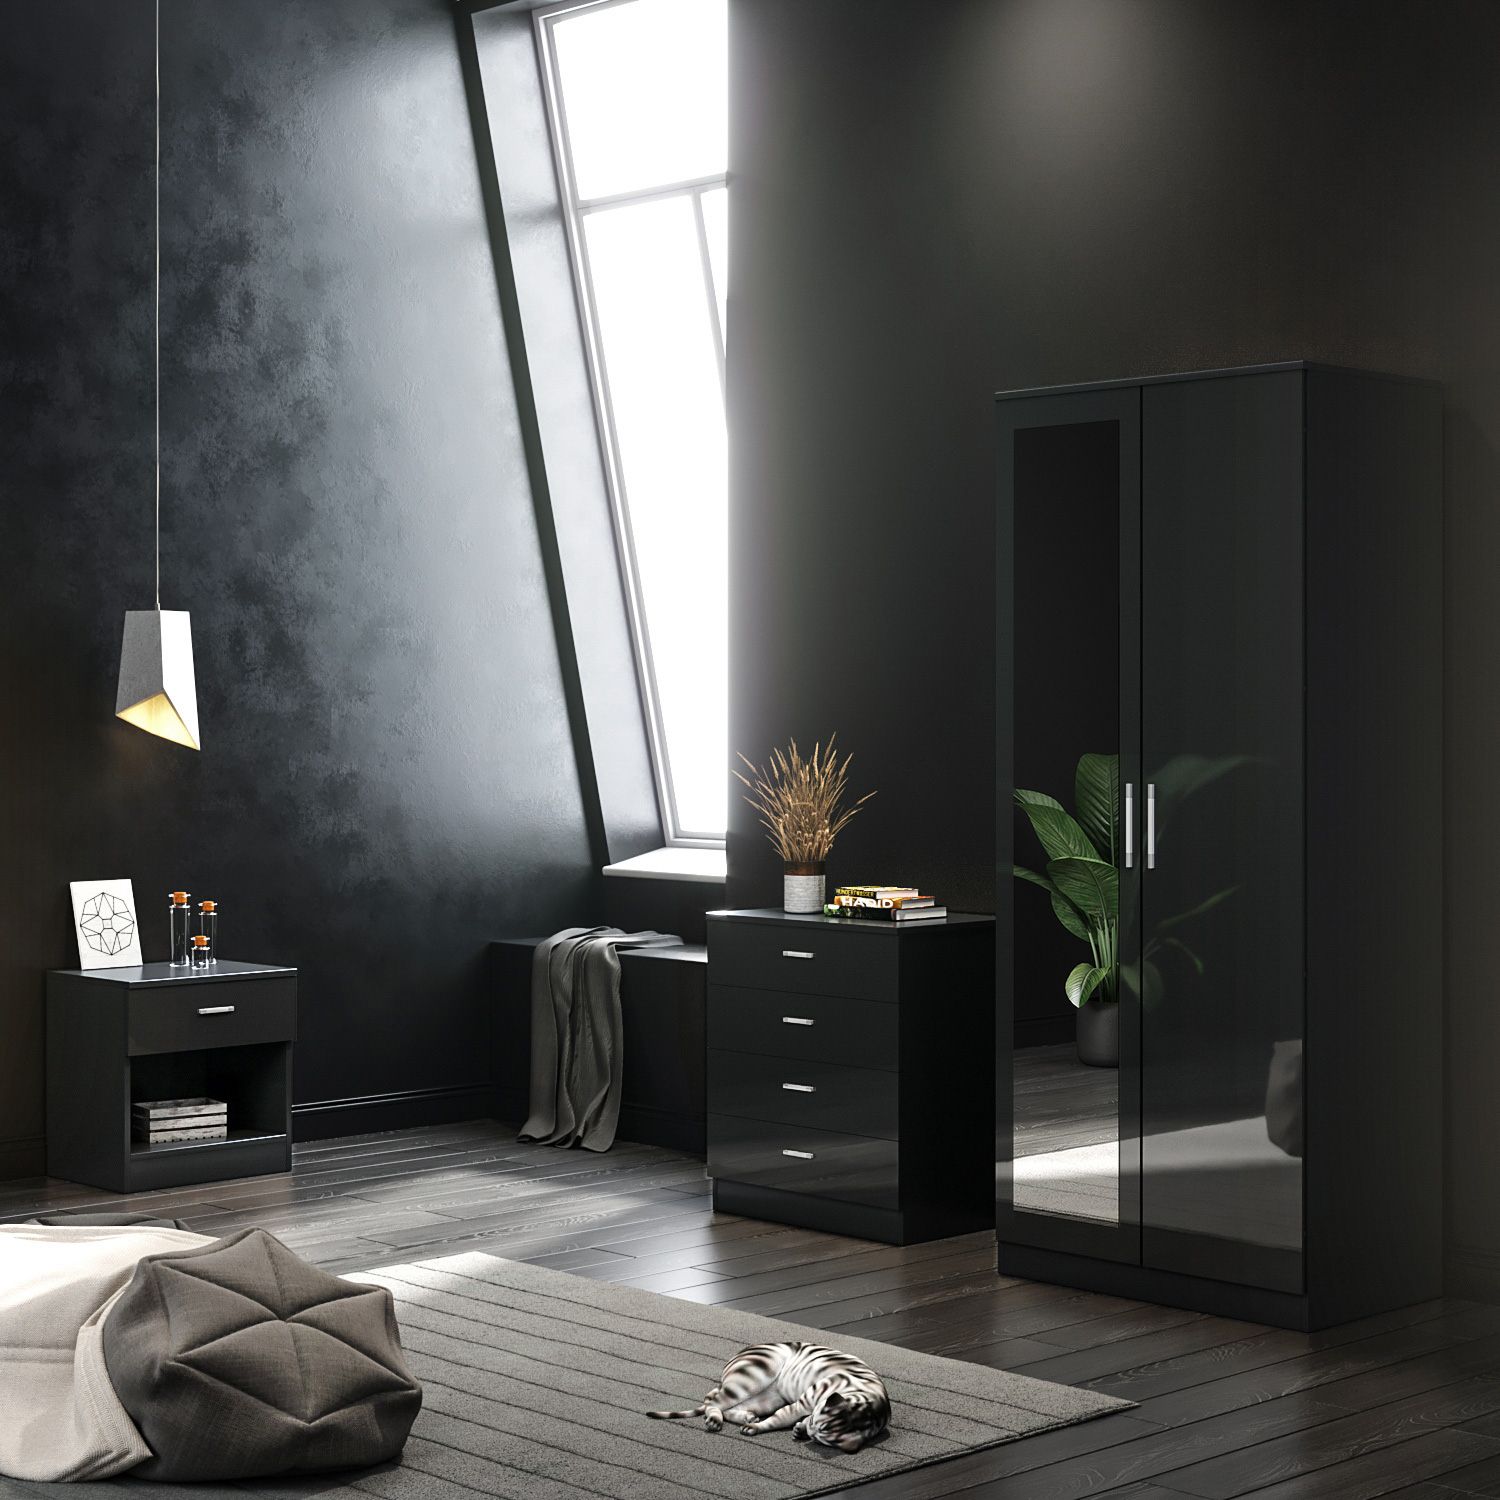 Elegant Bedroom Furniture Set 2 Doors Soft Close Wardrobe With Mirror +  Chest Of Drawer + Bedside Cabinet High Gloss,black,wooden With Regard To Black Shiny Wardrobes (View 9 of 15)